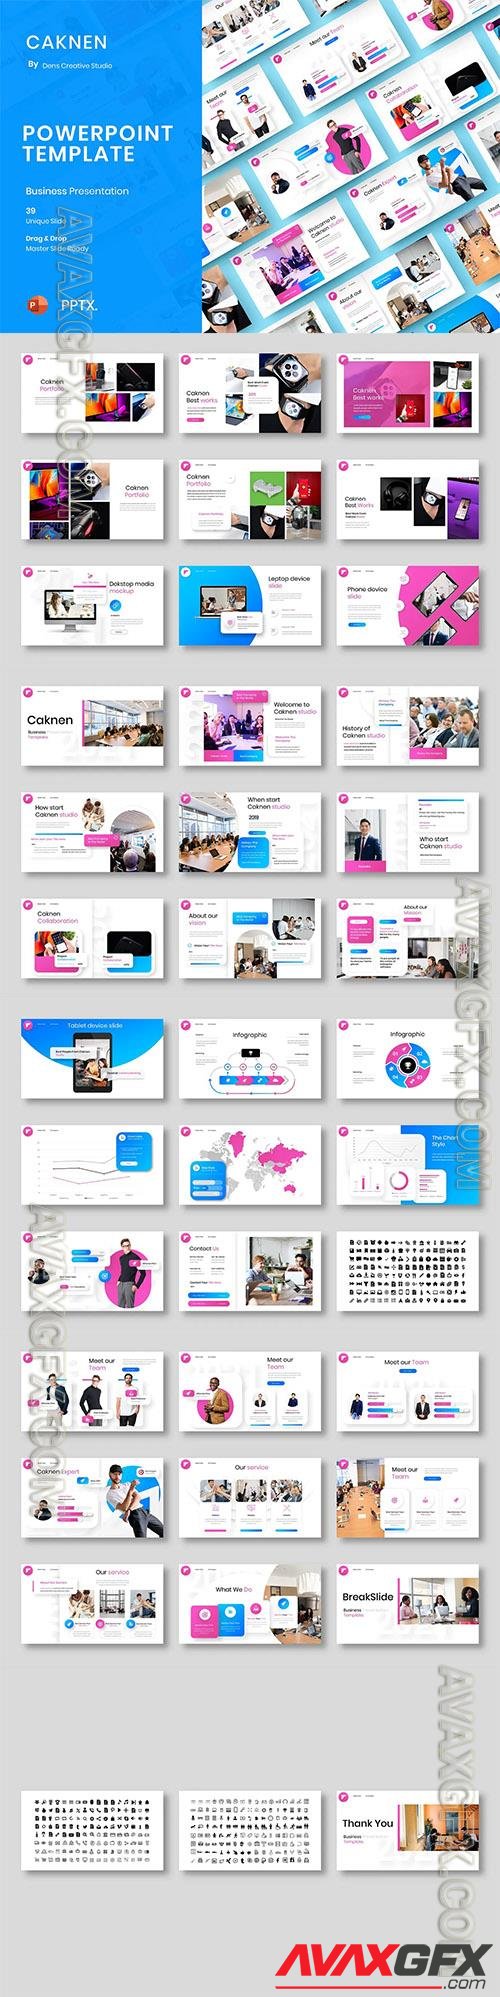 Caknen – Business Powerpoint, Keynote and Google Slides Template